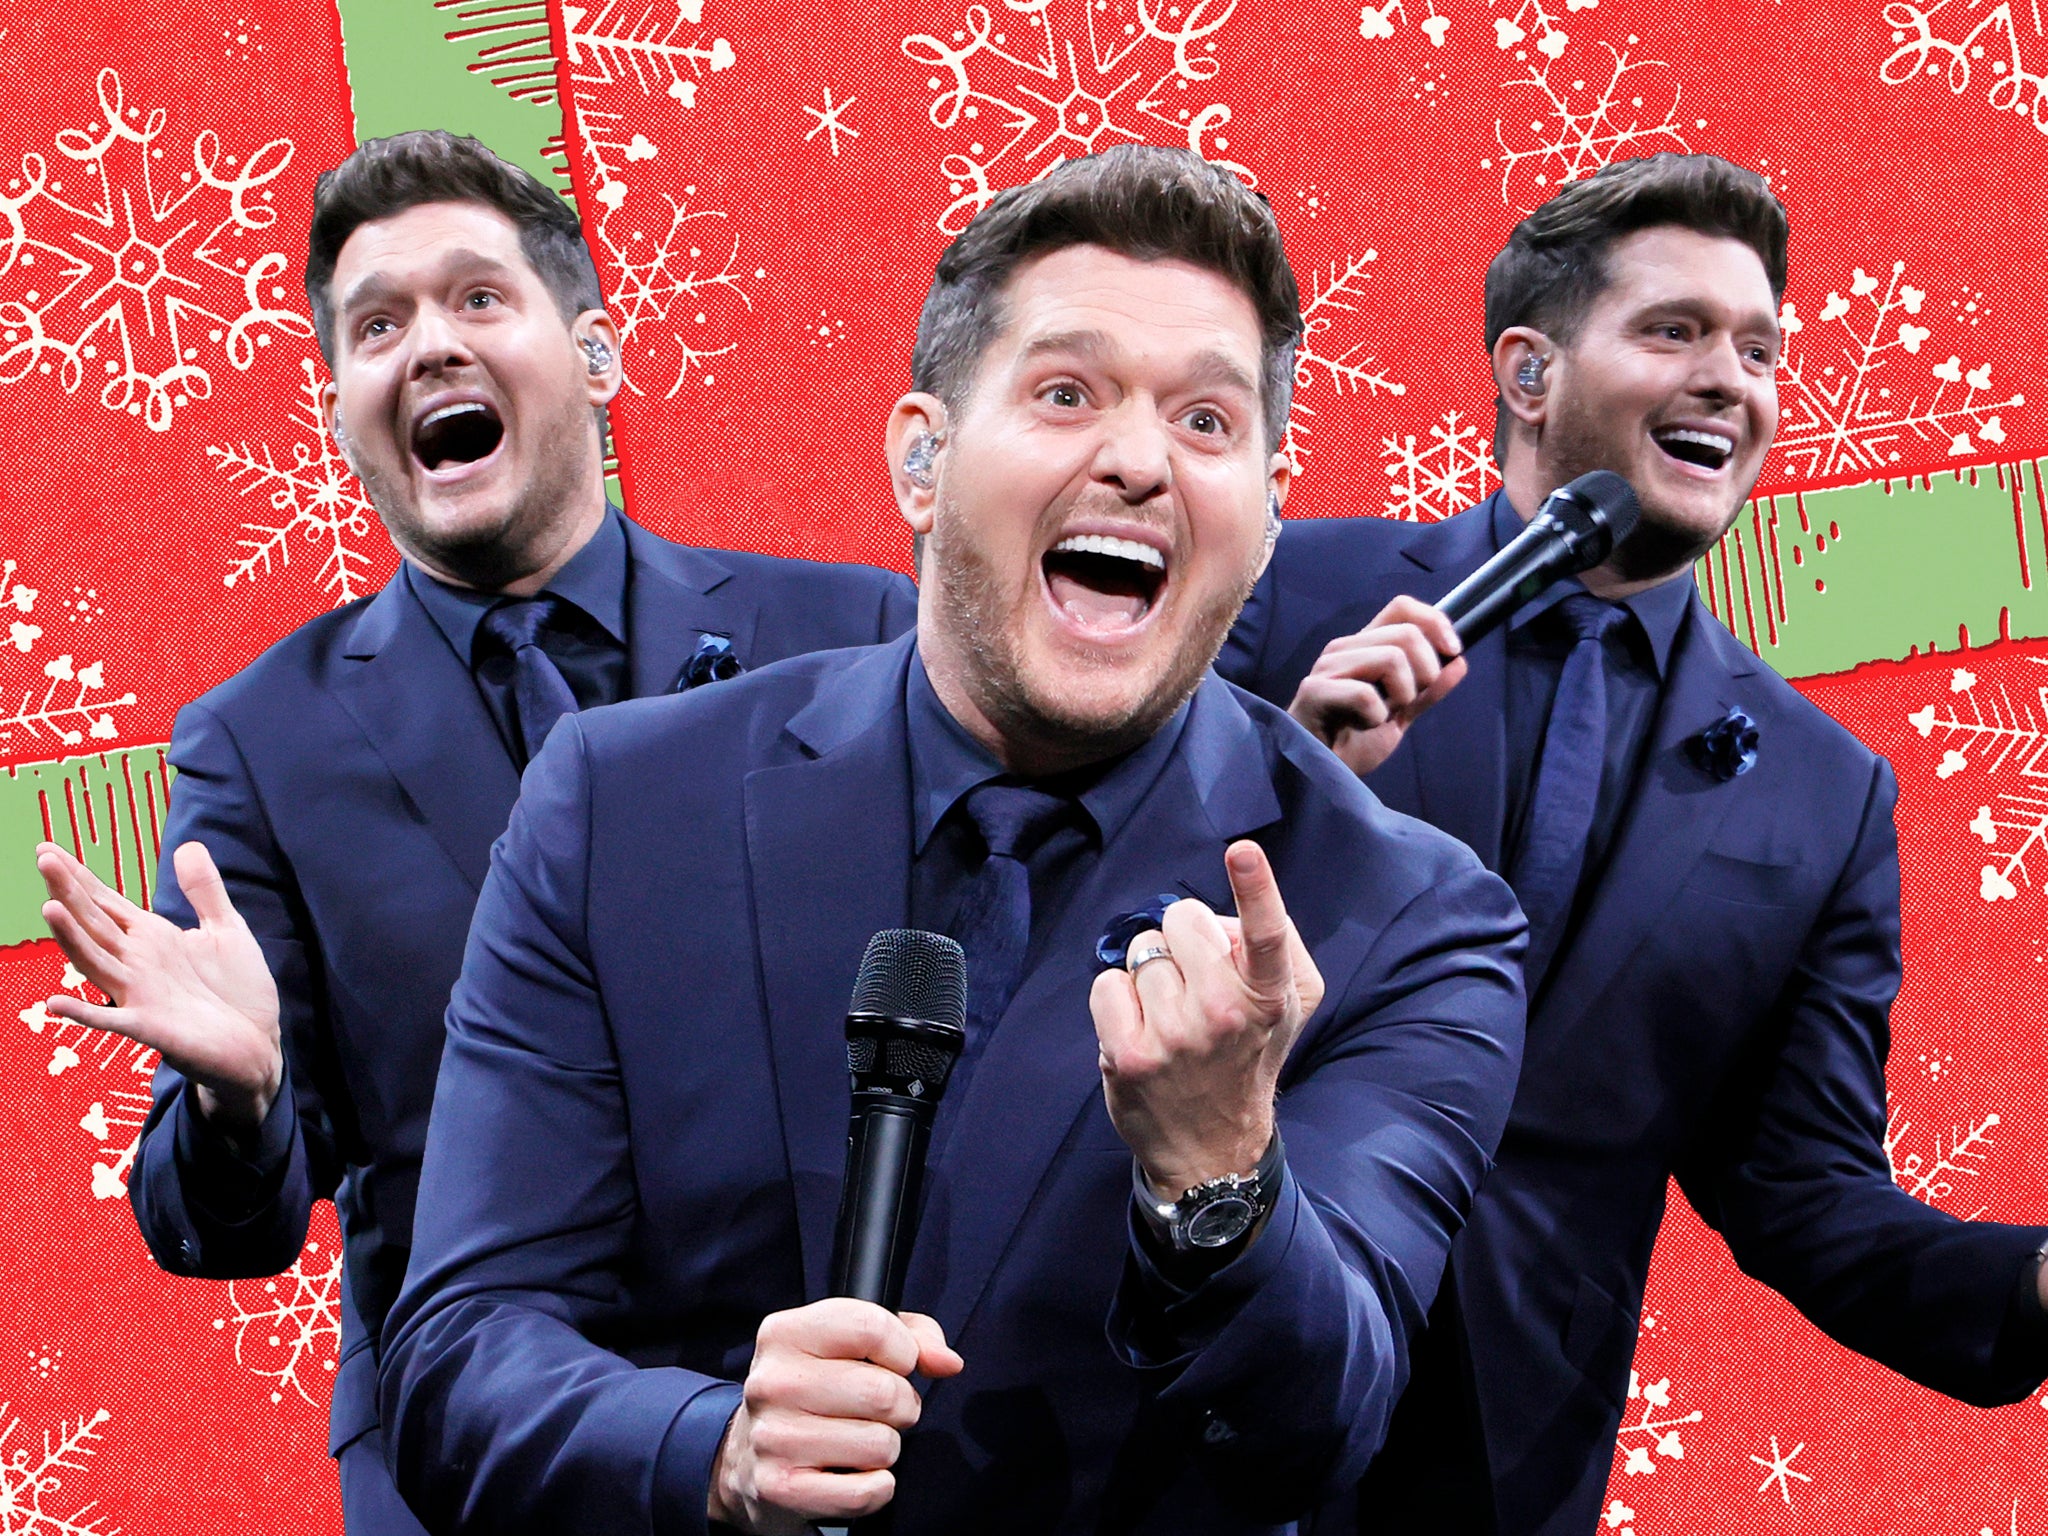 Michael Bublé’s jingling bells are woven into the fabric of life itself on a sub-atomic level every Christmas